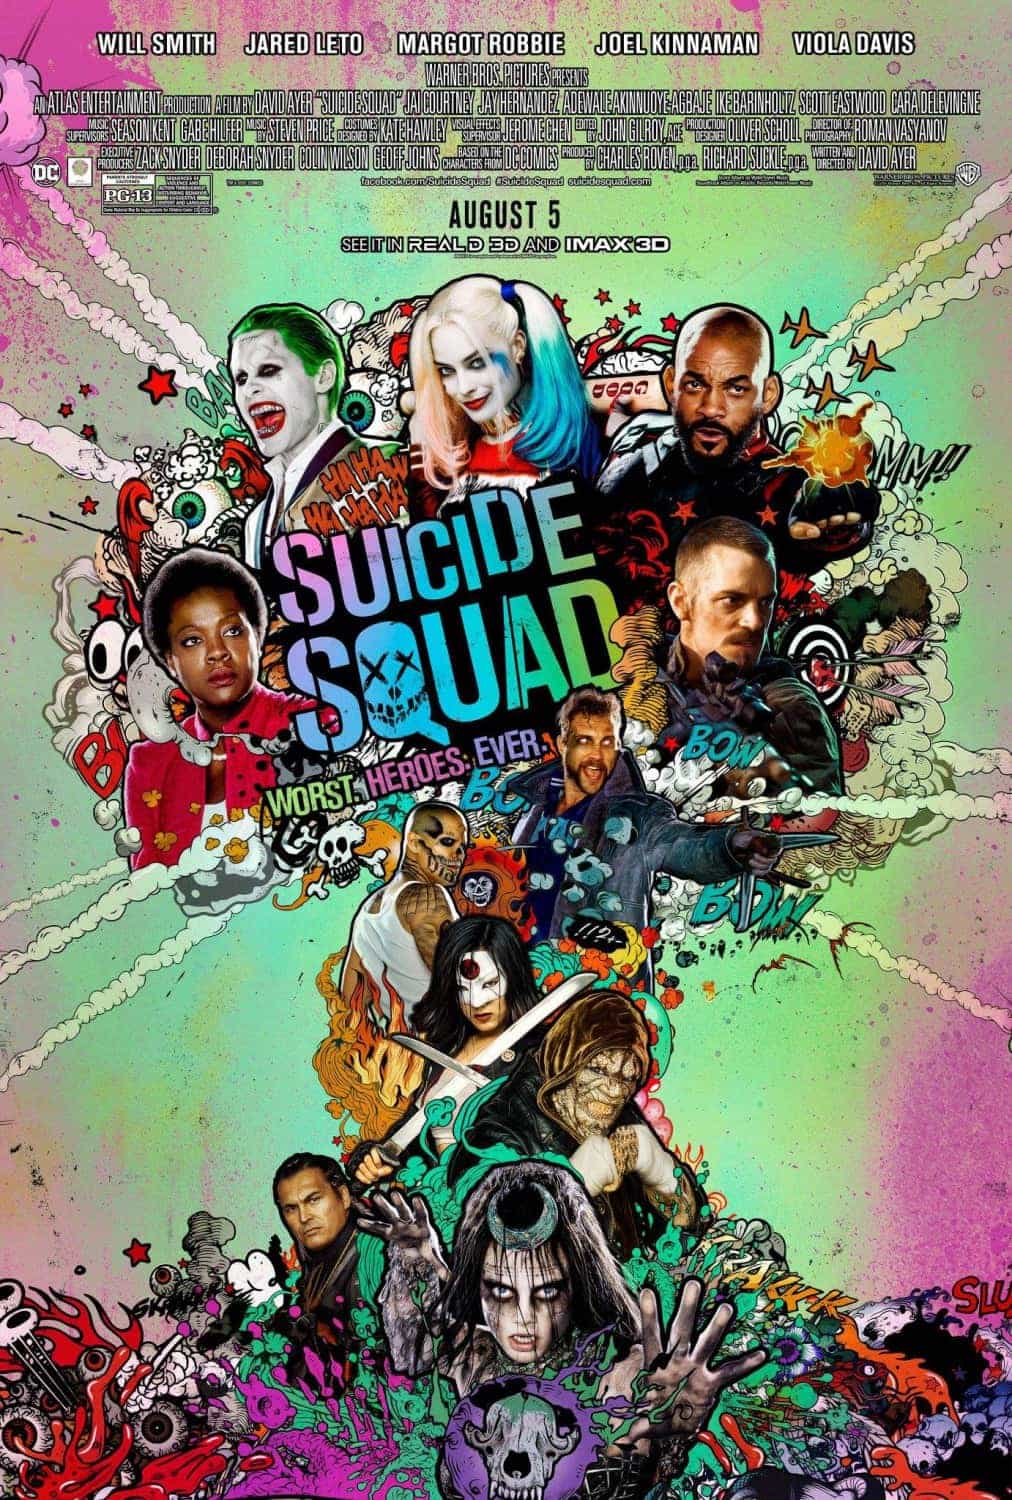 First trailer for Suicide Squad, dark!